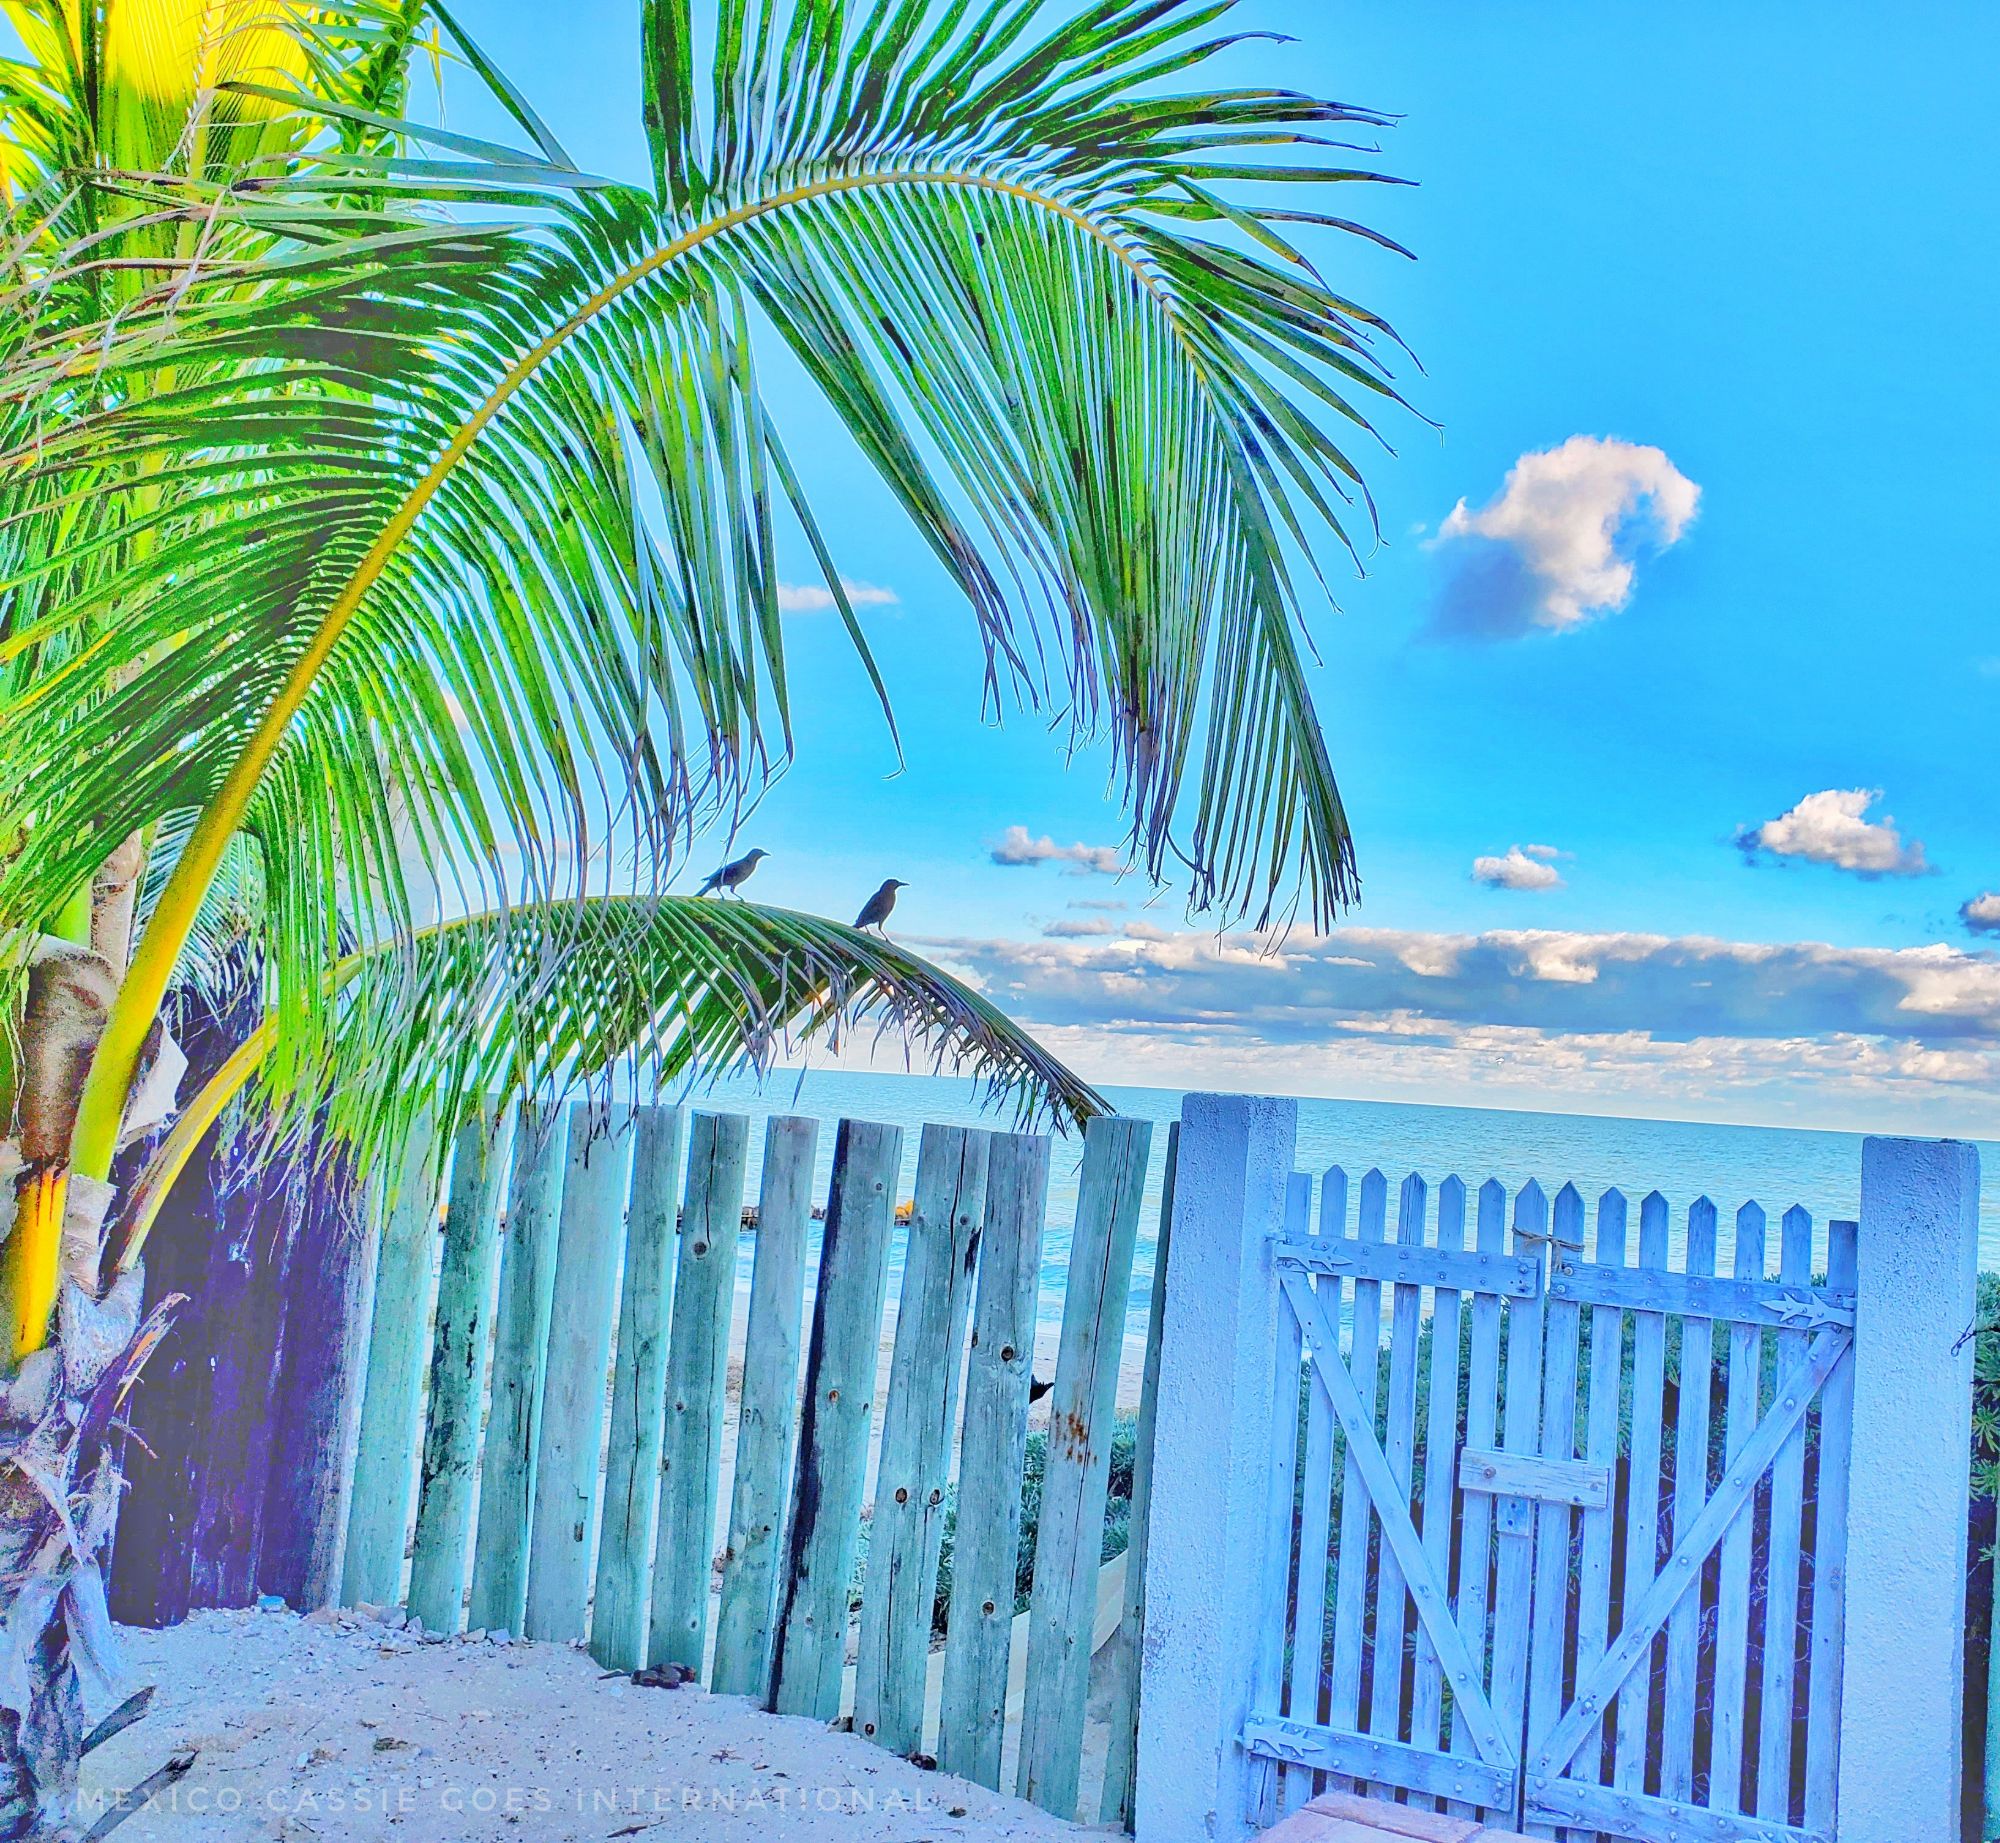 over saturated photo of a palm frond near a white gate and fence- blue sky behind